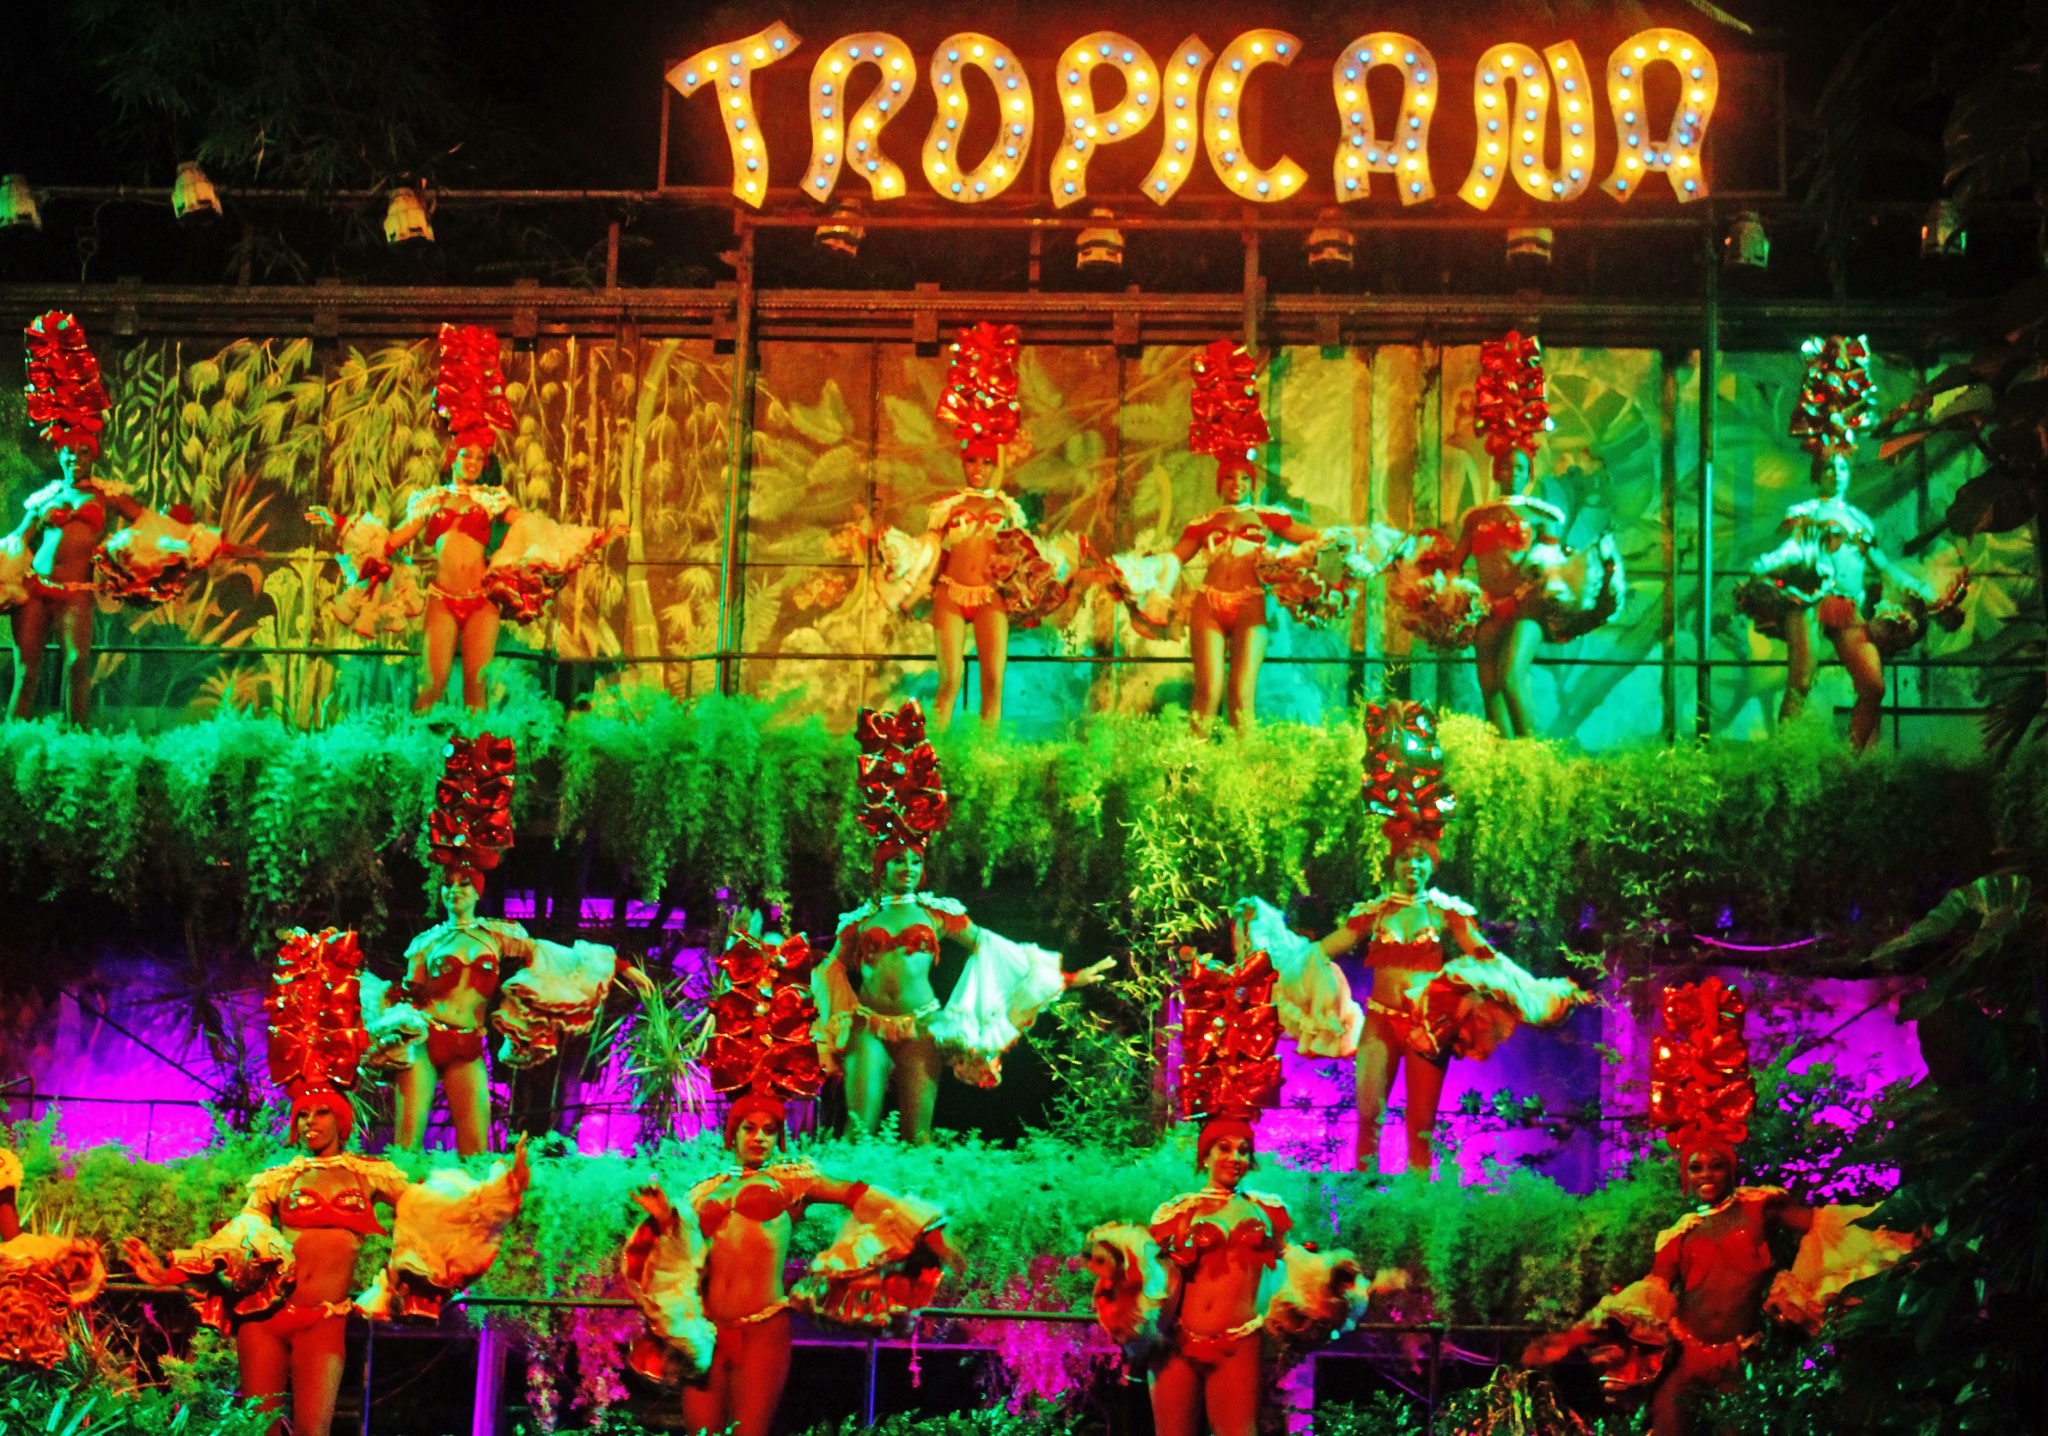 The Tropicana is a lush three tiered tropical garden setting that showcases over 100 dancers and performers on three sides of a grand ballroom sized center stage.